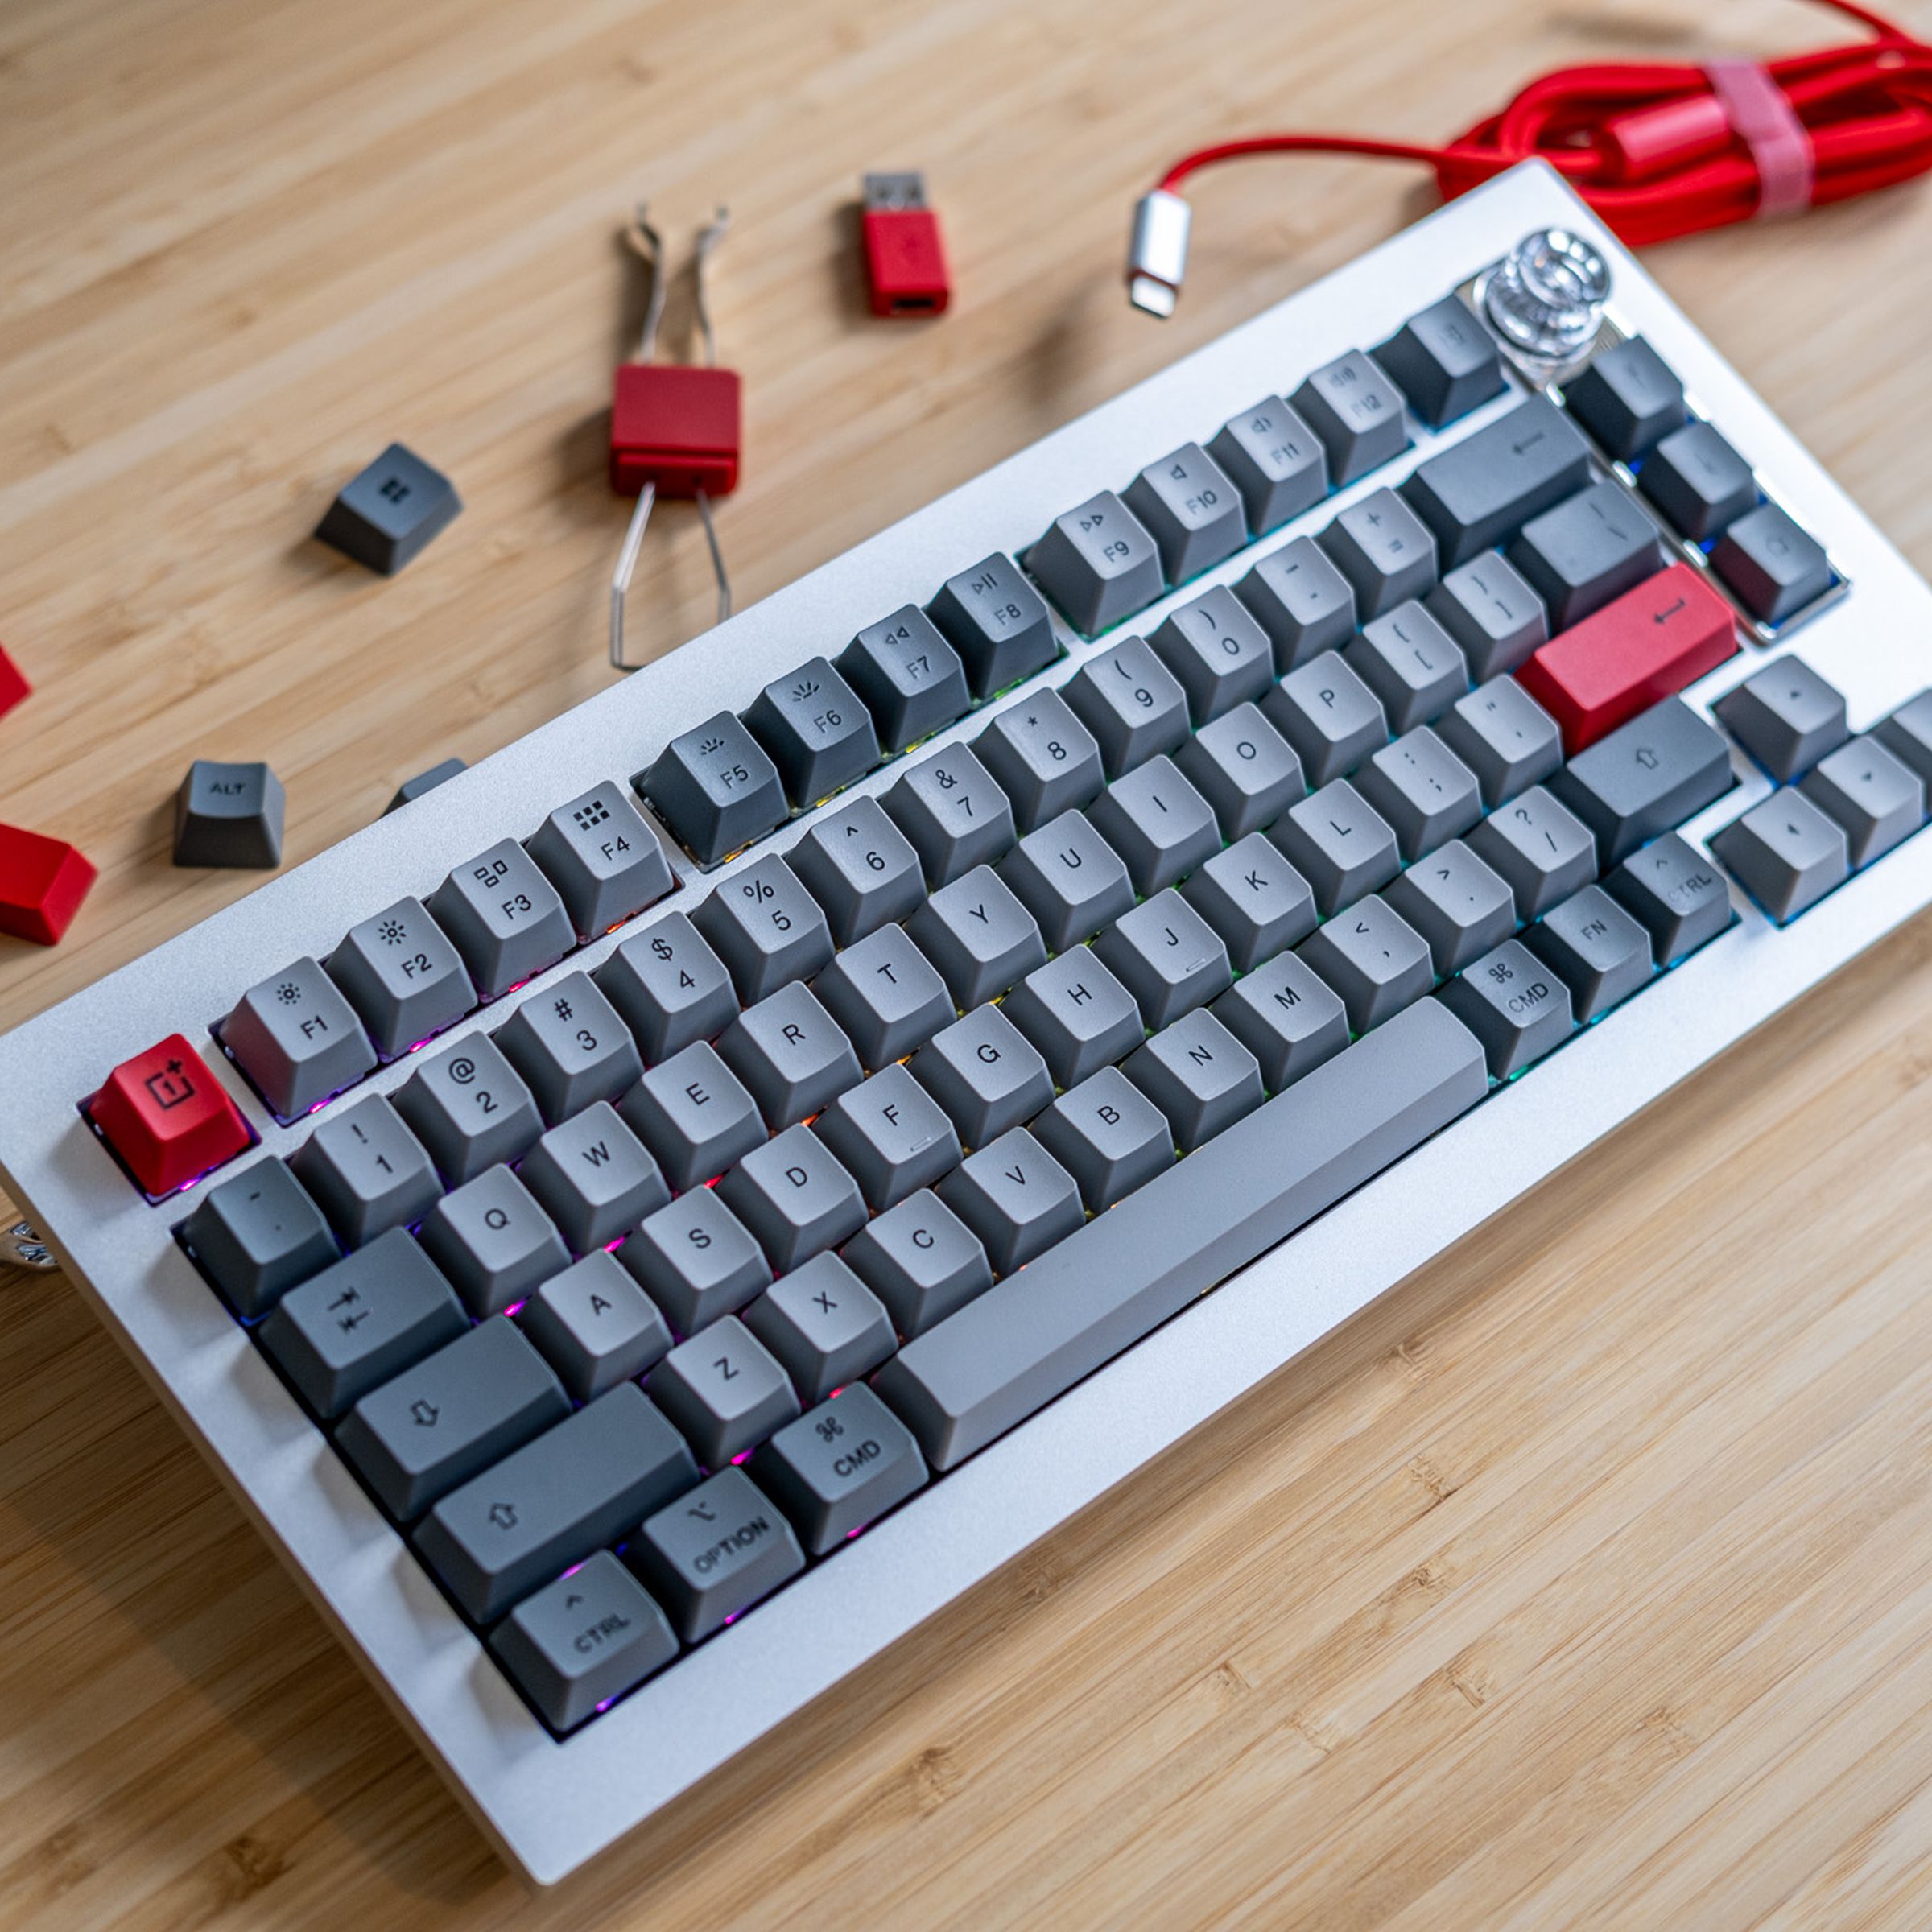 OnePlus keyboard on desk surrounded by accessories.